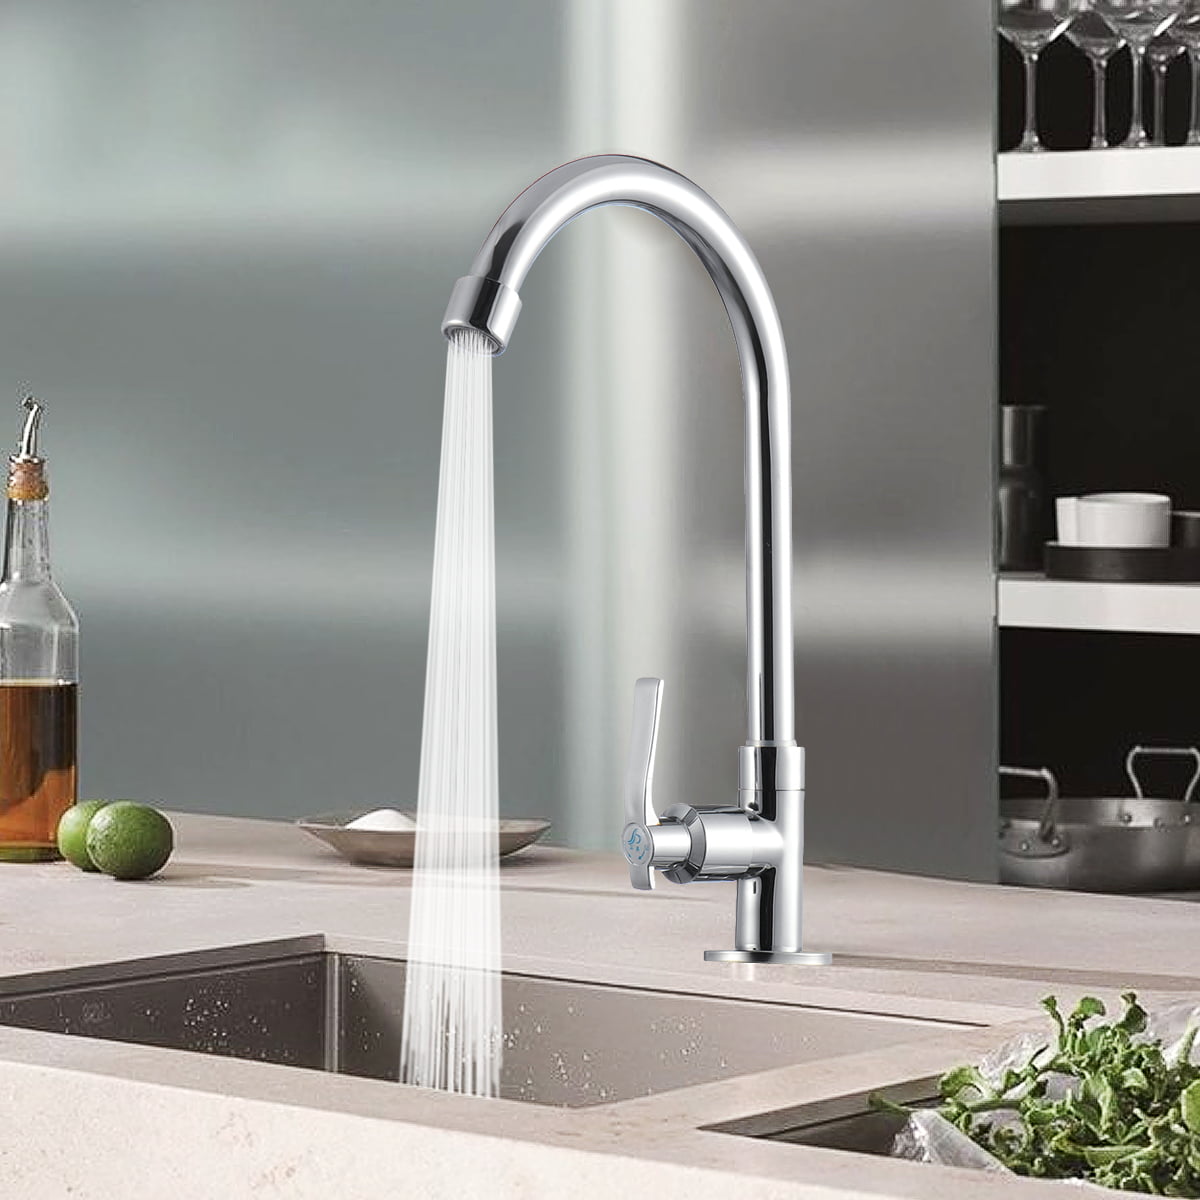 Kitchen Sink Faucet Single Cold Tap Swivel Spout Bathroom Drink Water Wall Tap 